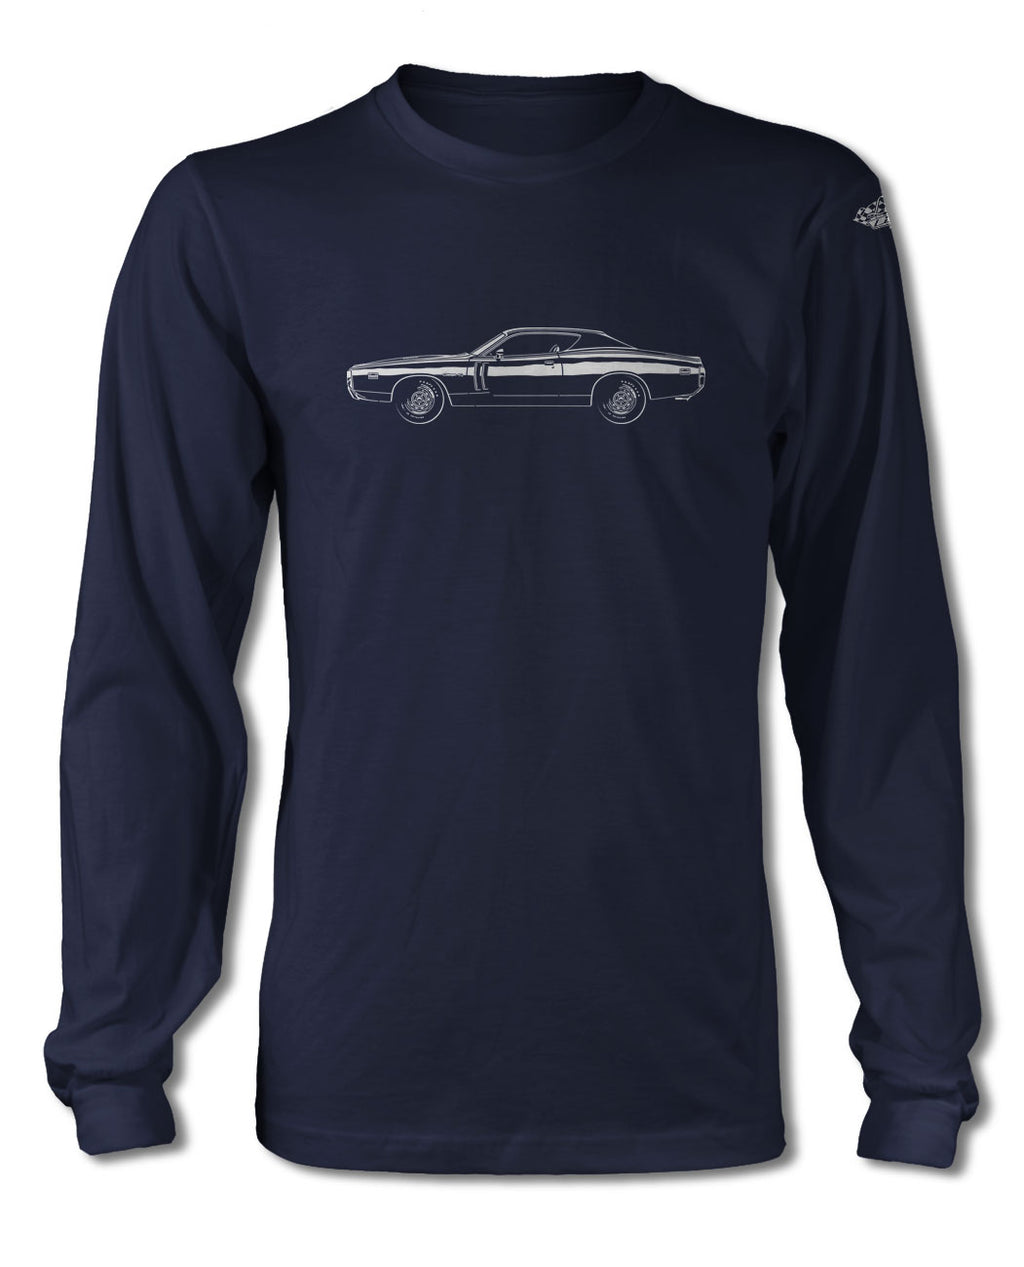 1971 Dodge Charger SE Hardtop T-Shirt - Long Sleeves - Side View